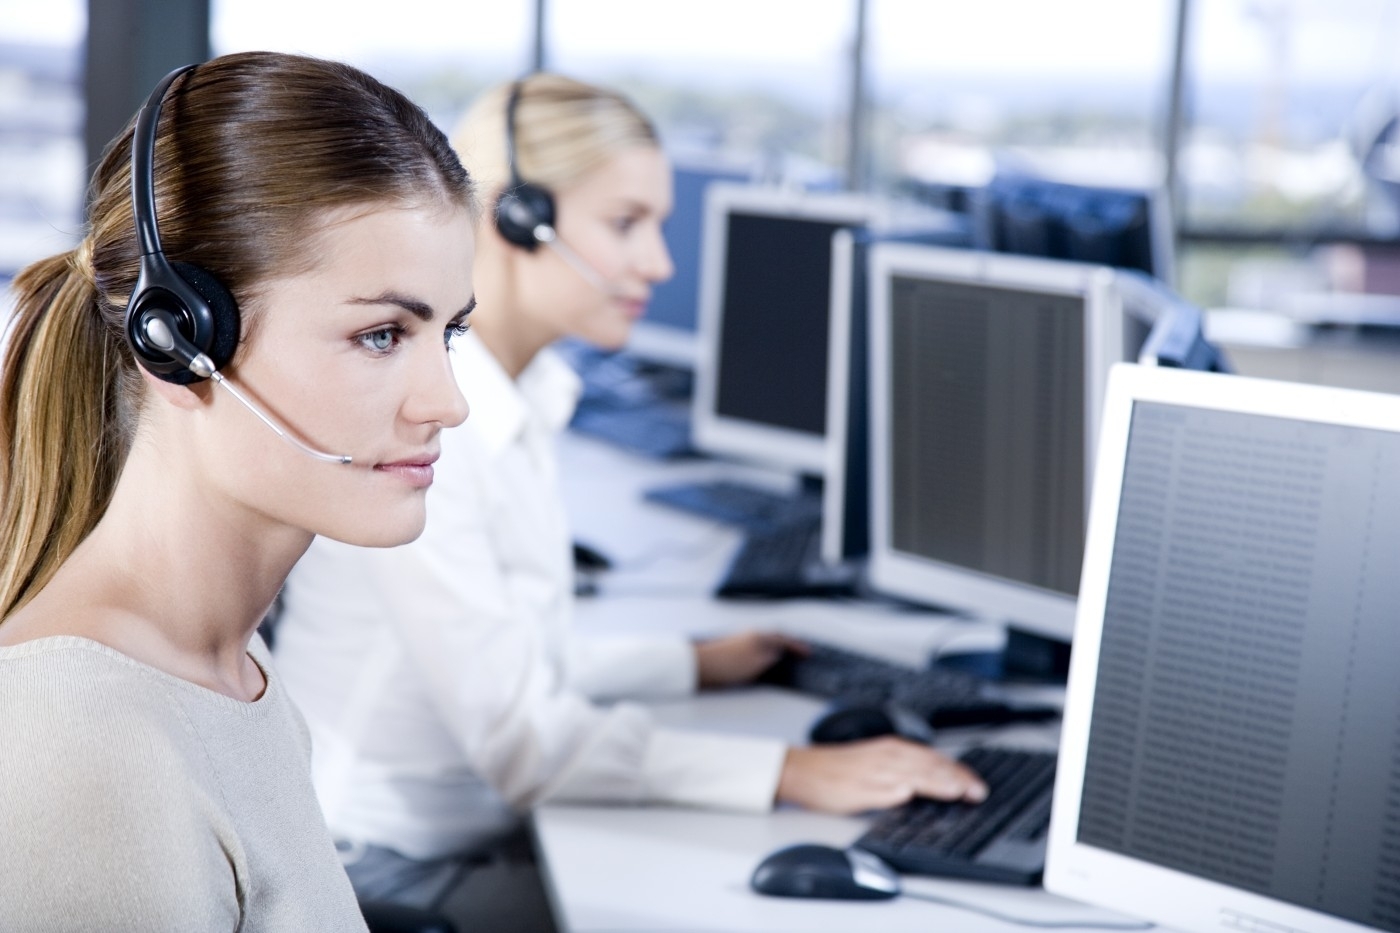 Balance Credit opens call center in Plano